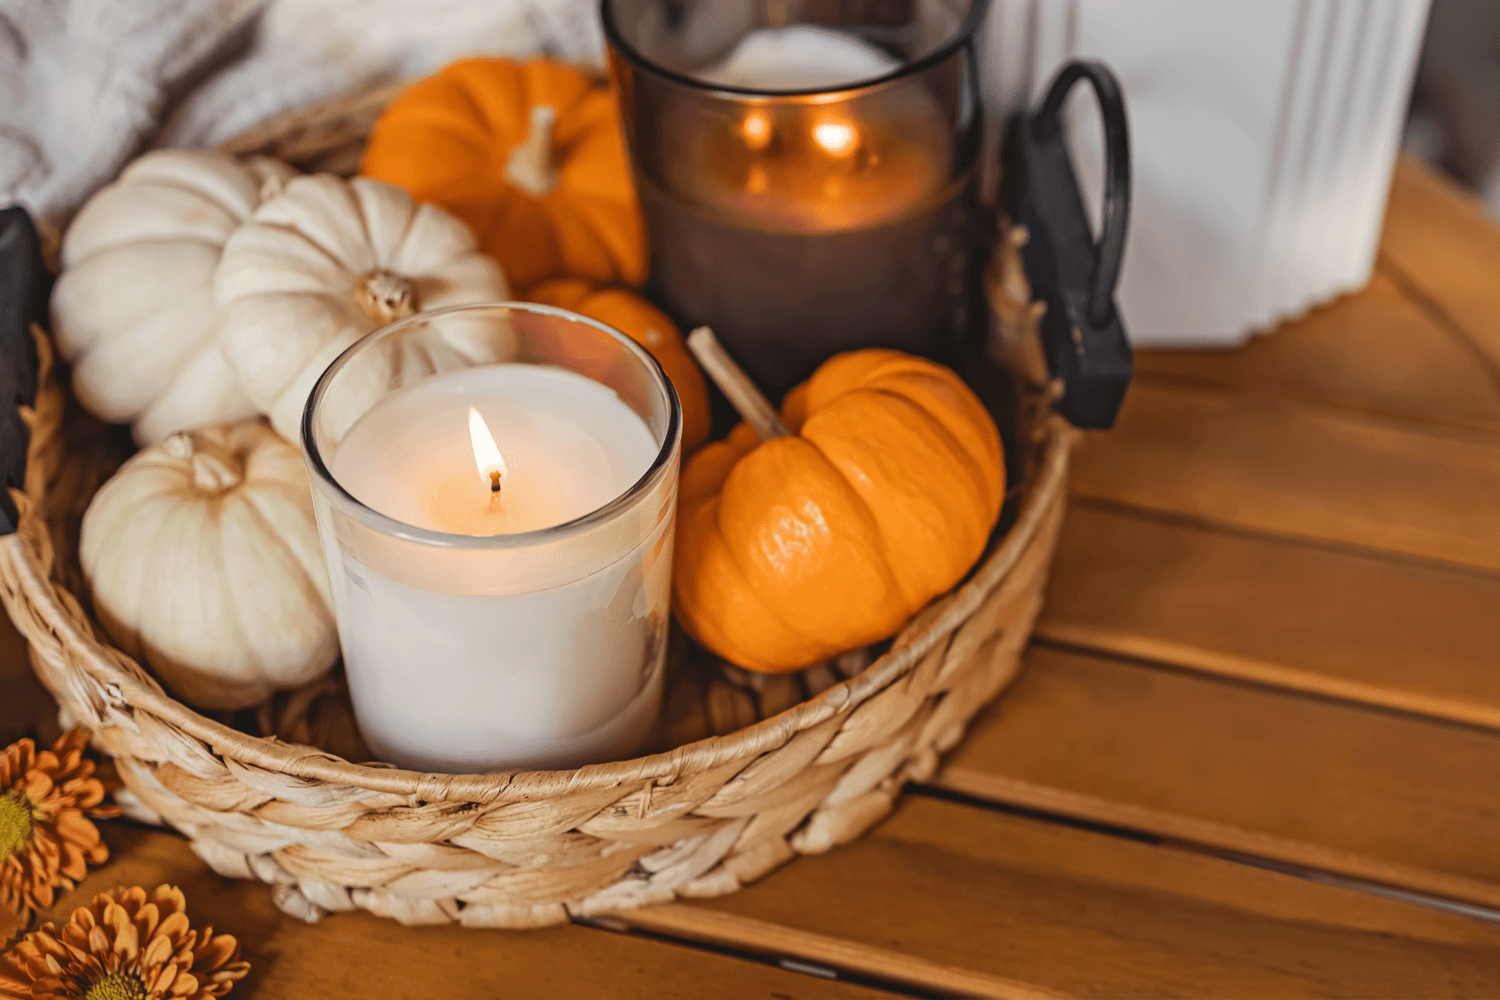 A Candle burning in a basket with pumpkins